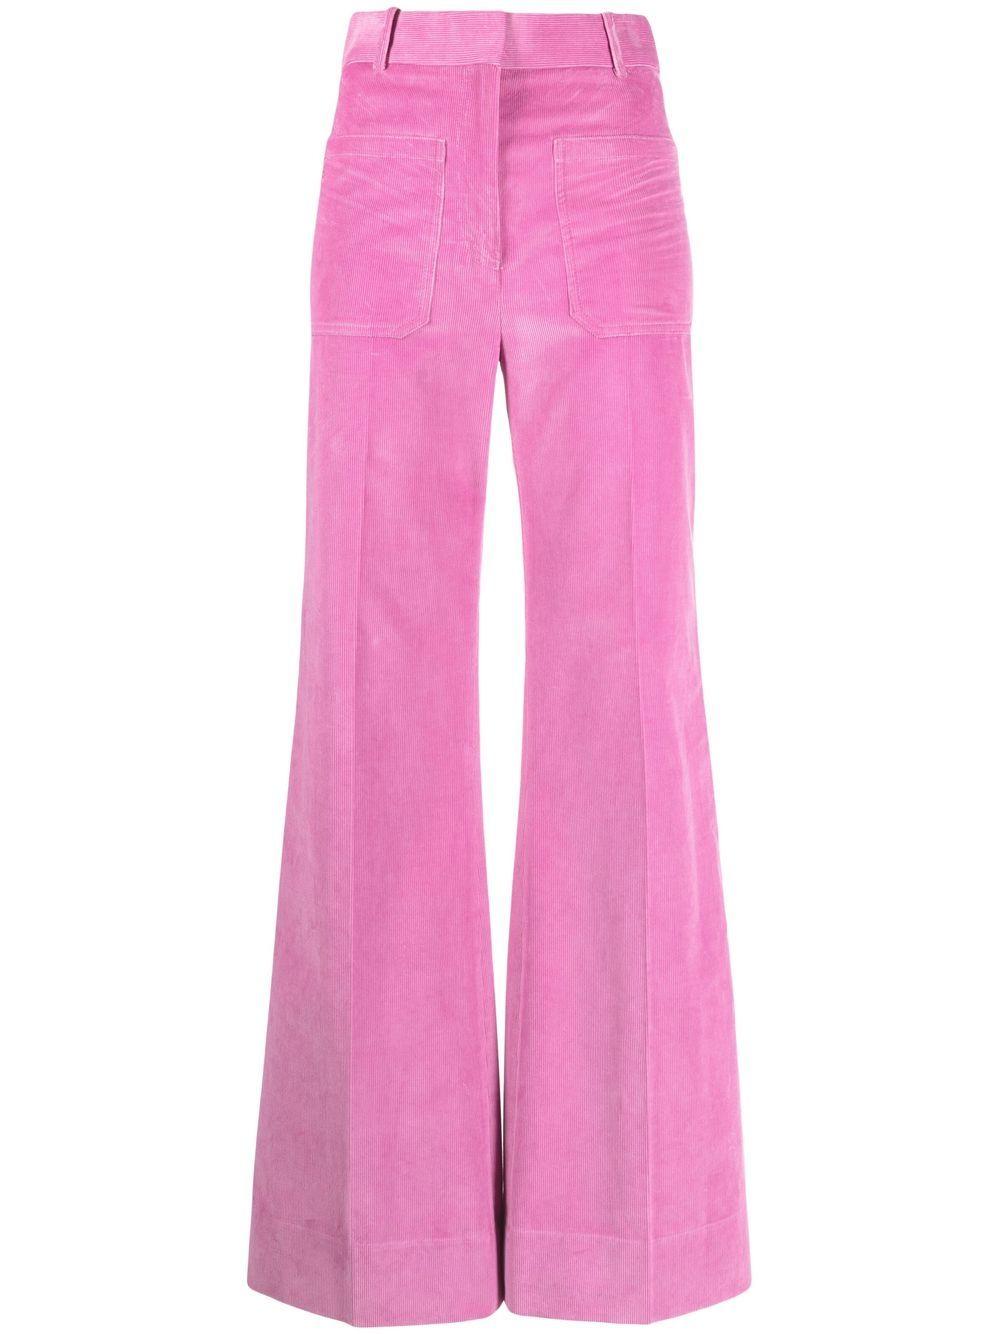 Victoria Beckham Alina Corduroy Wide-leg Trousers in Pink | Lyst